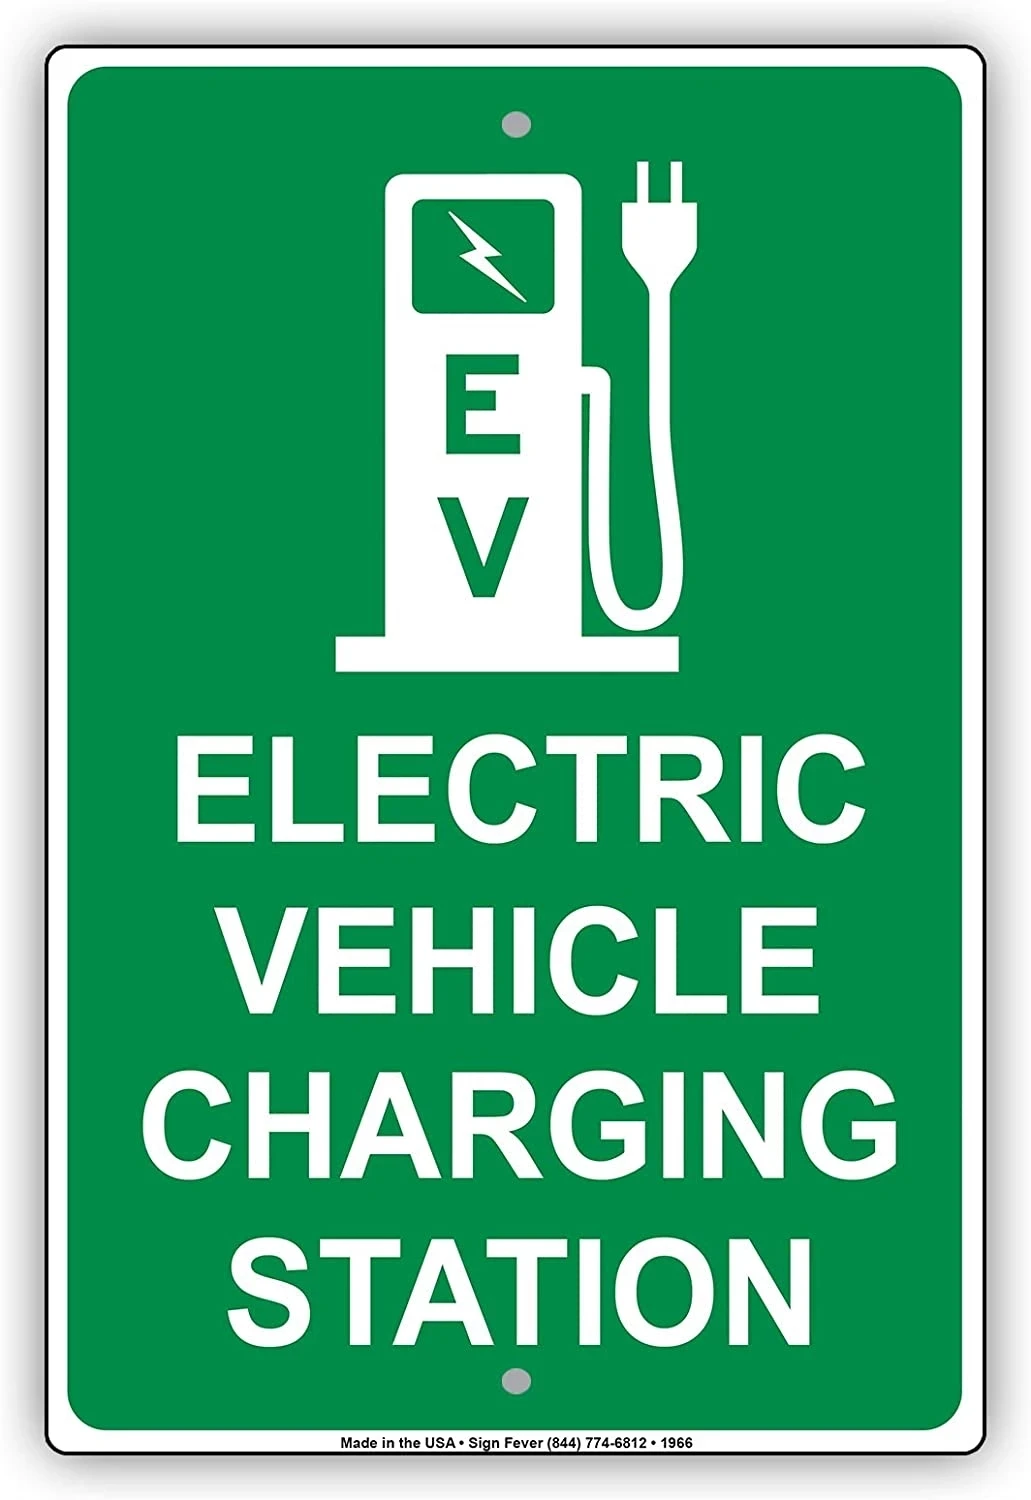 

Electric Vehicle Charging Station Metal Tin Sign Reserved Spot With Graphic Alert Caution Warning Aluminum Home Decoration